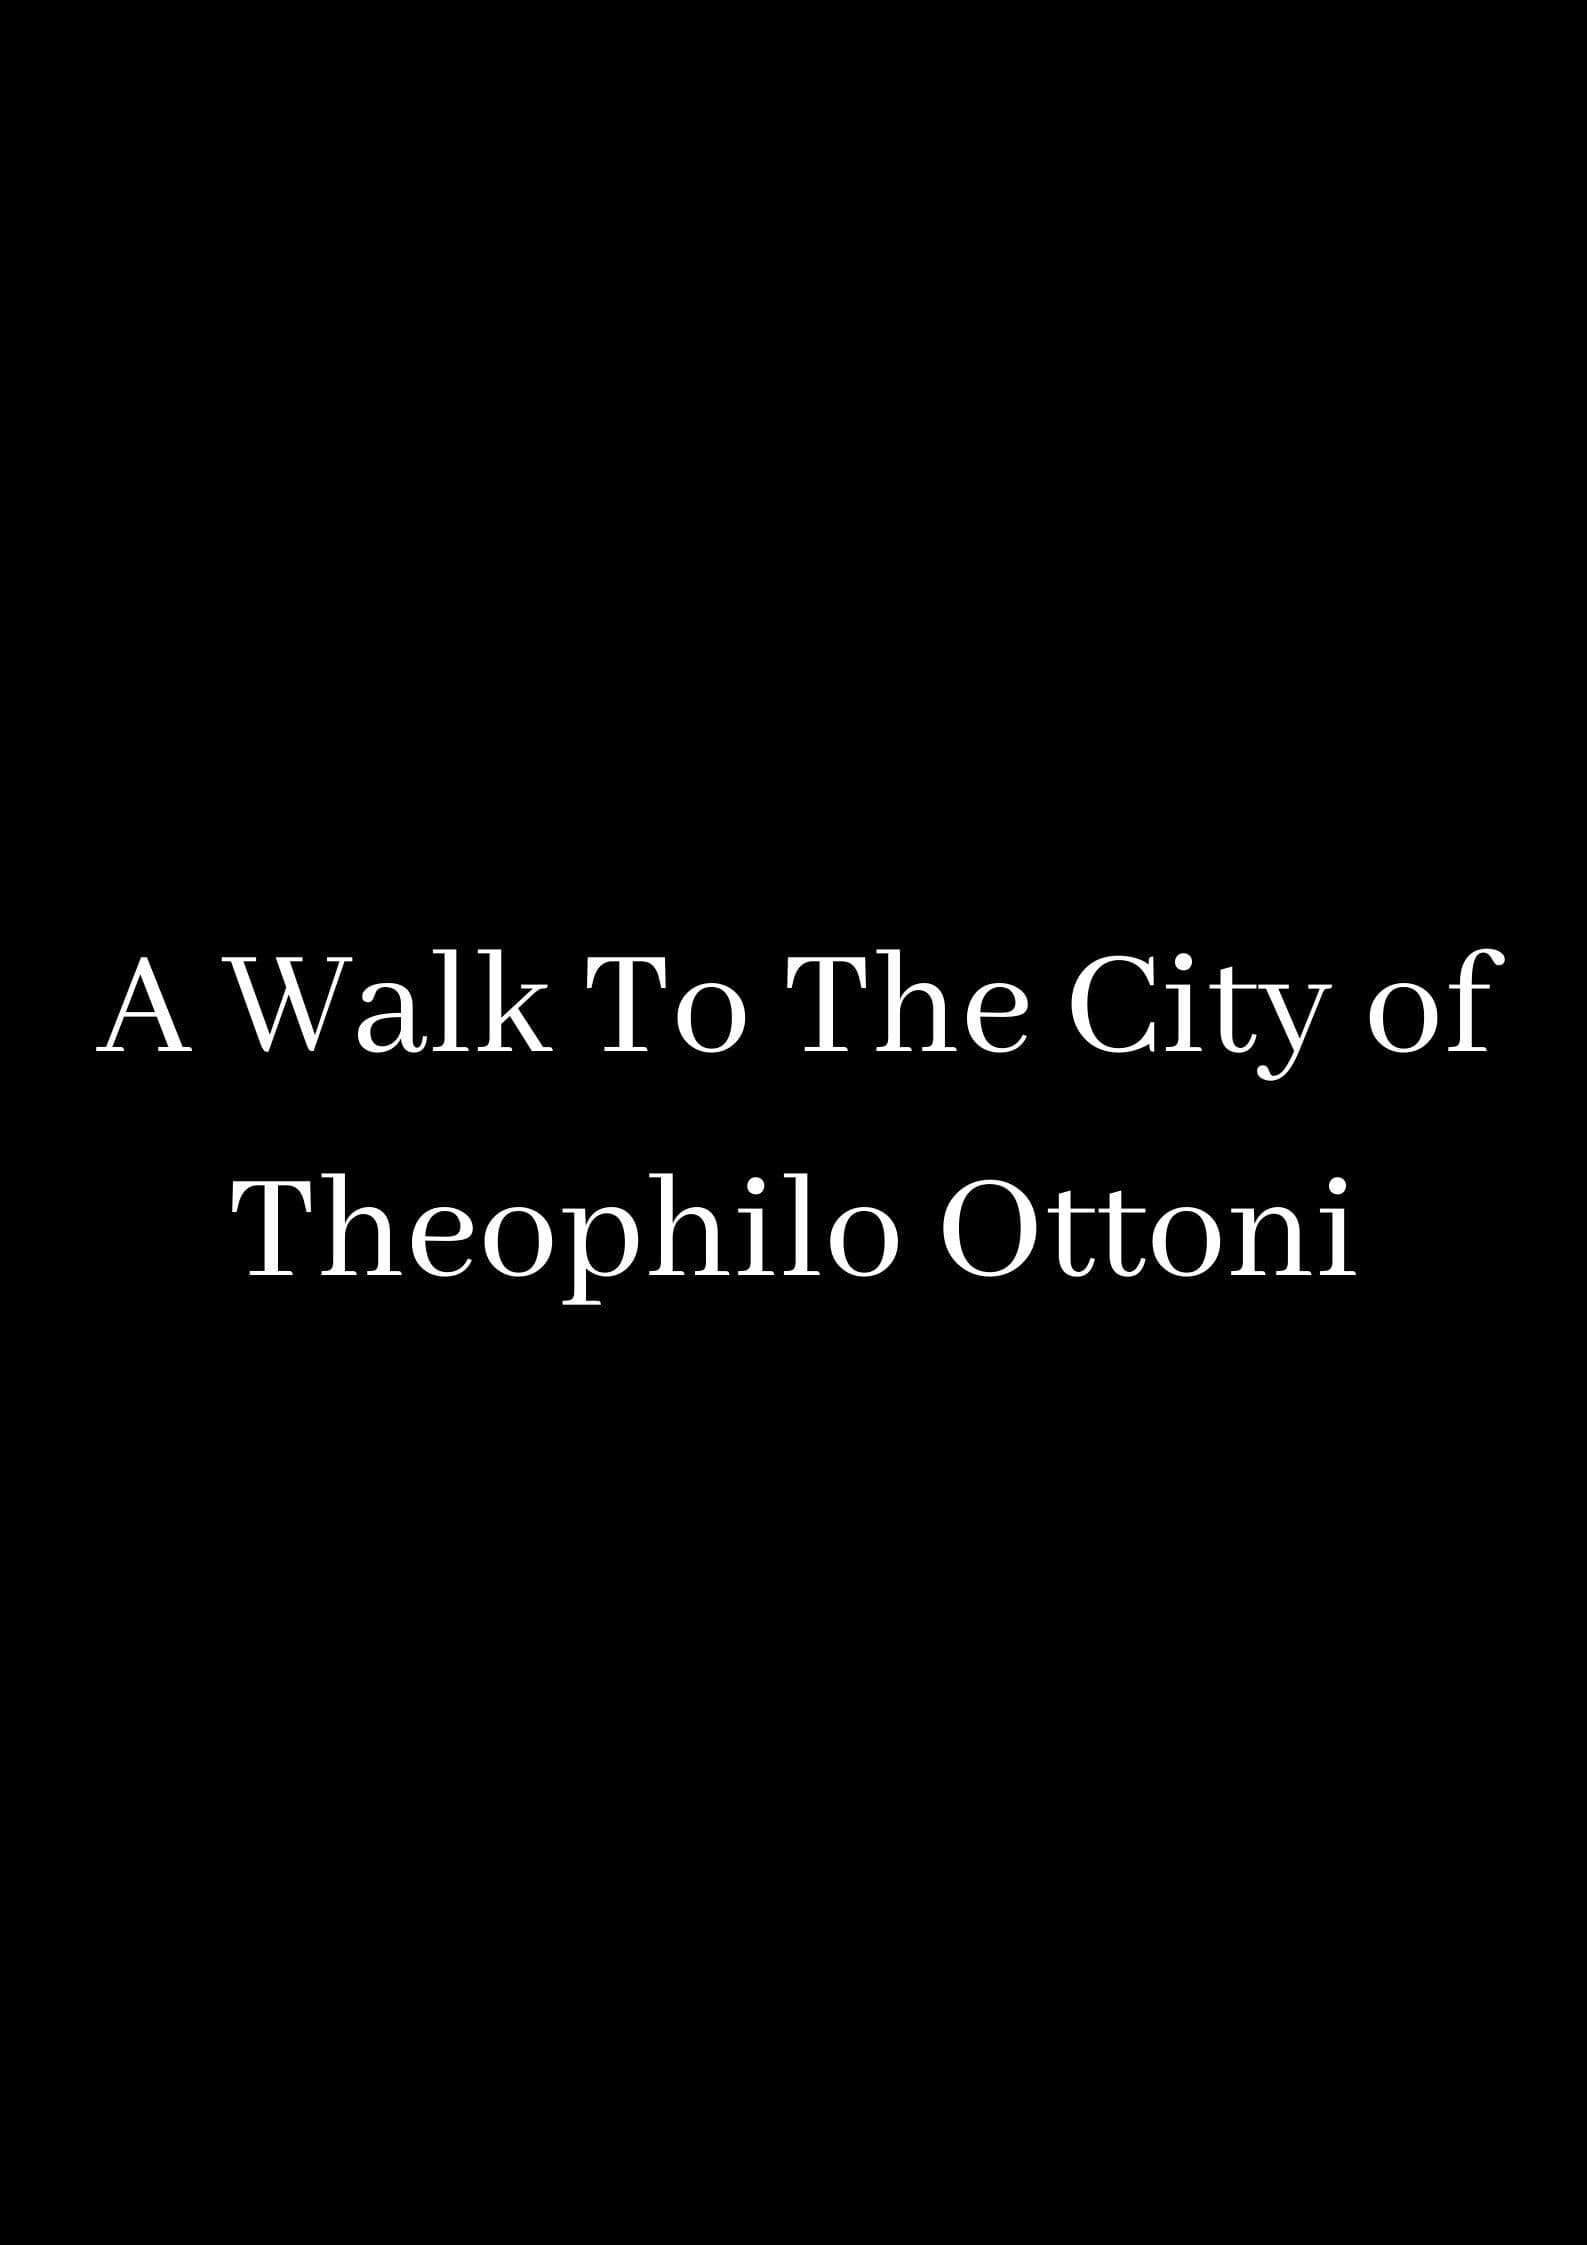 A Walk To The City of Theophilo Ottoni